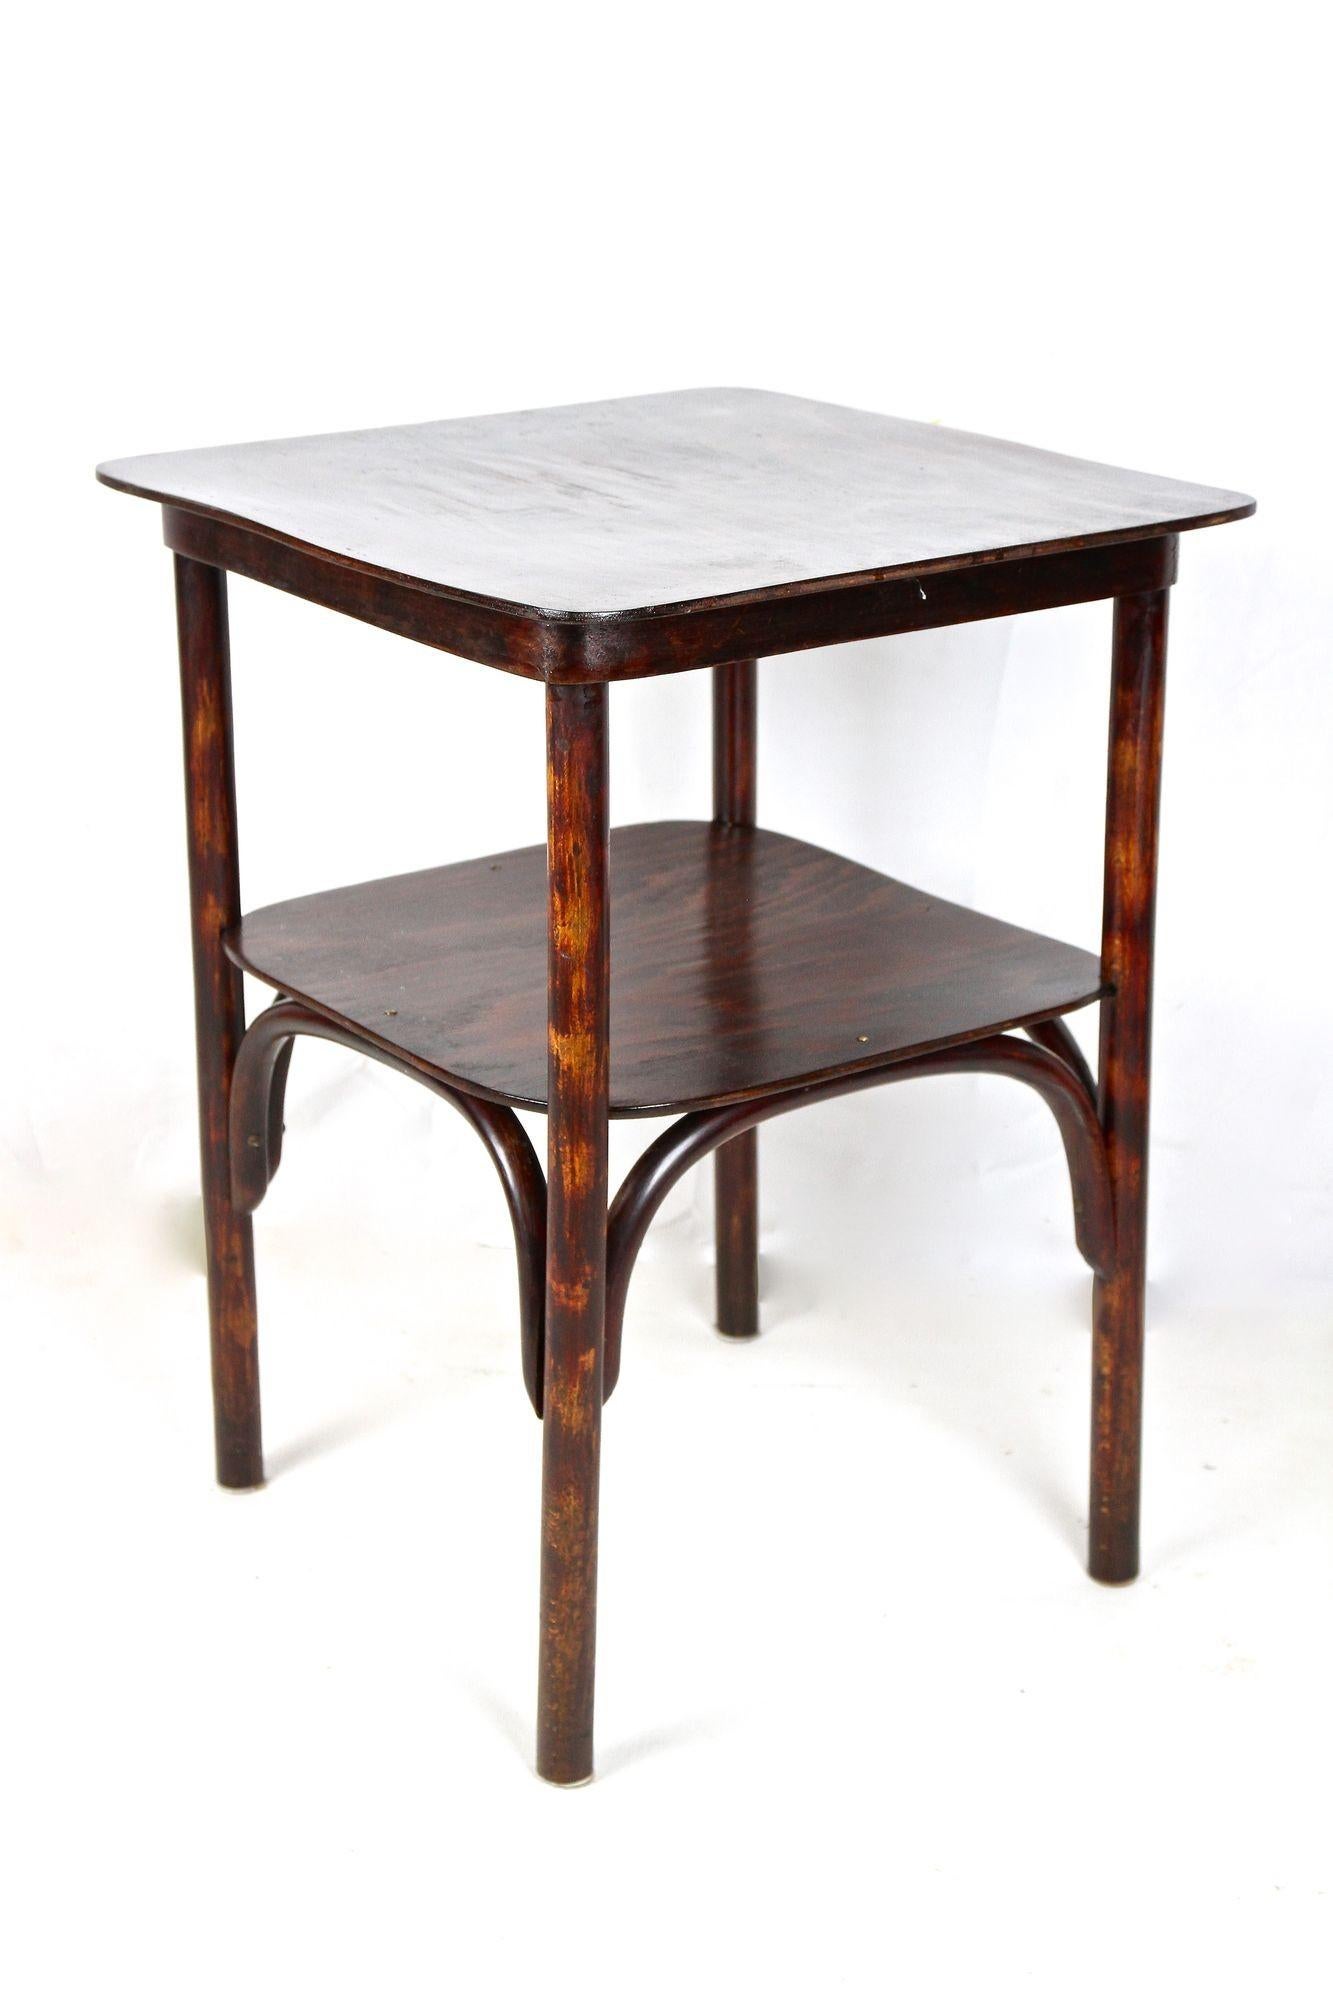 Art Nouveau 20th Century Bentwood Side Table by J&J Kohn, Austria ca. 1910 In Good Condition For Sale In Lichtenberg, AT